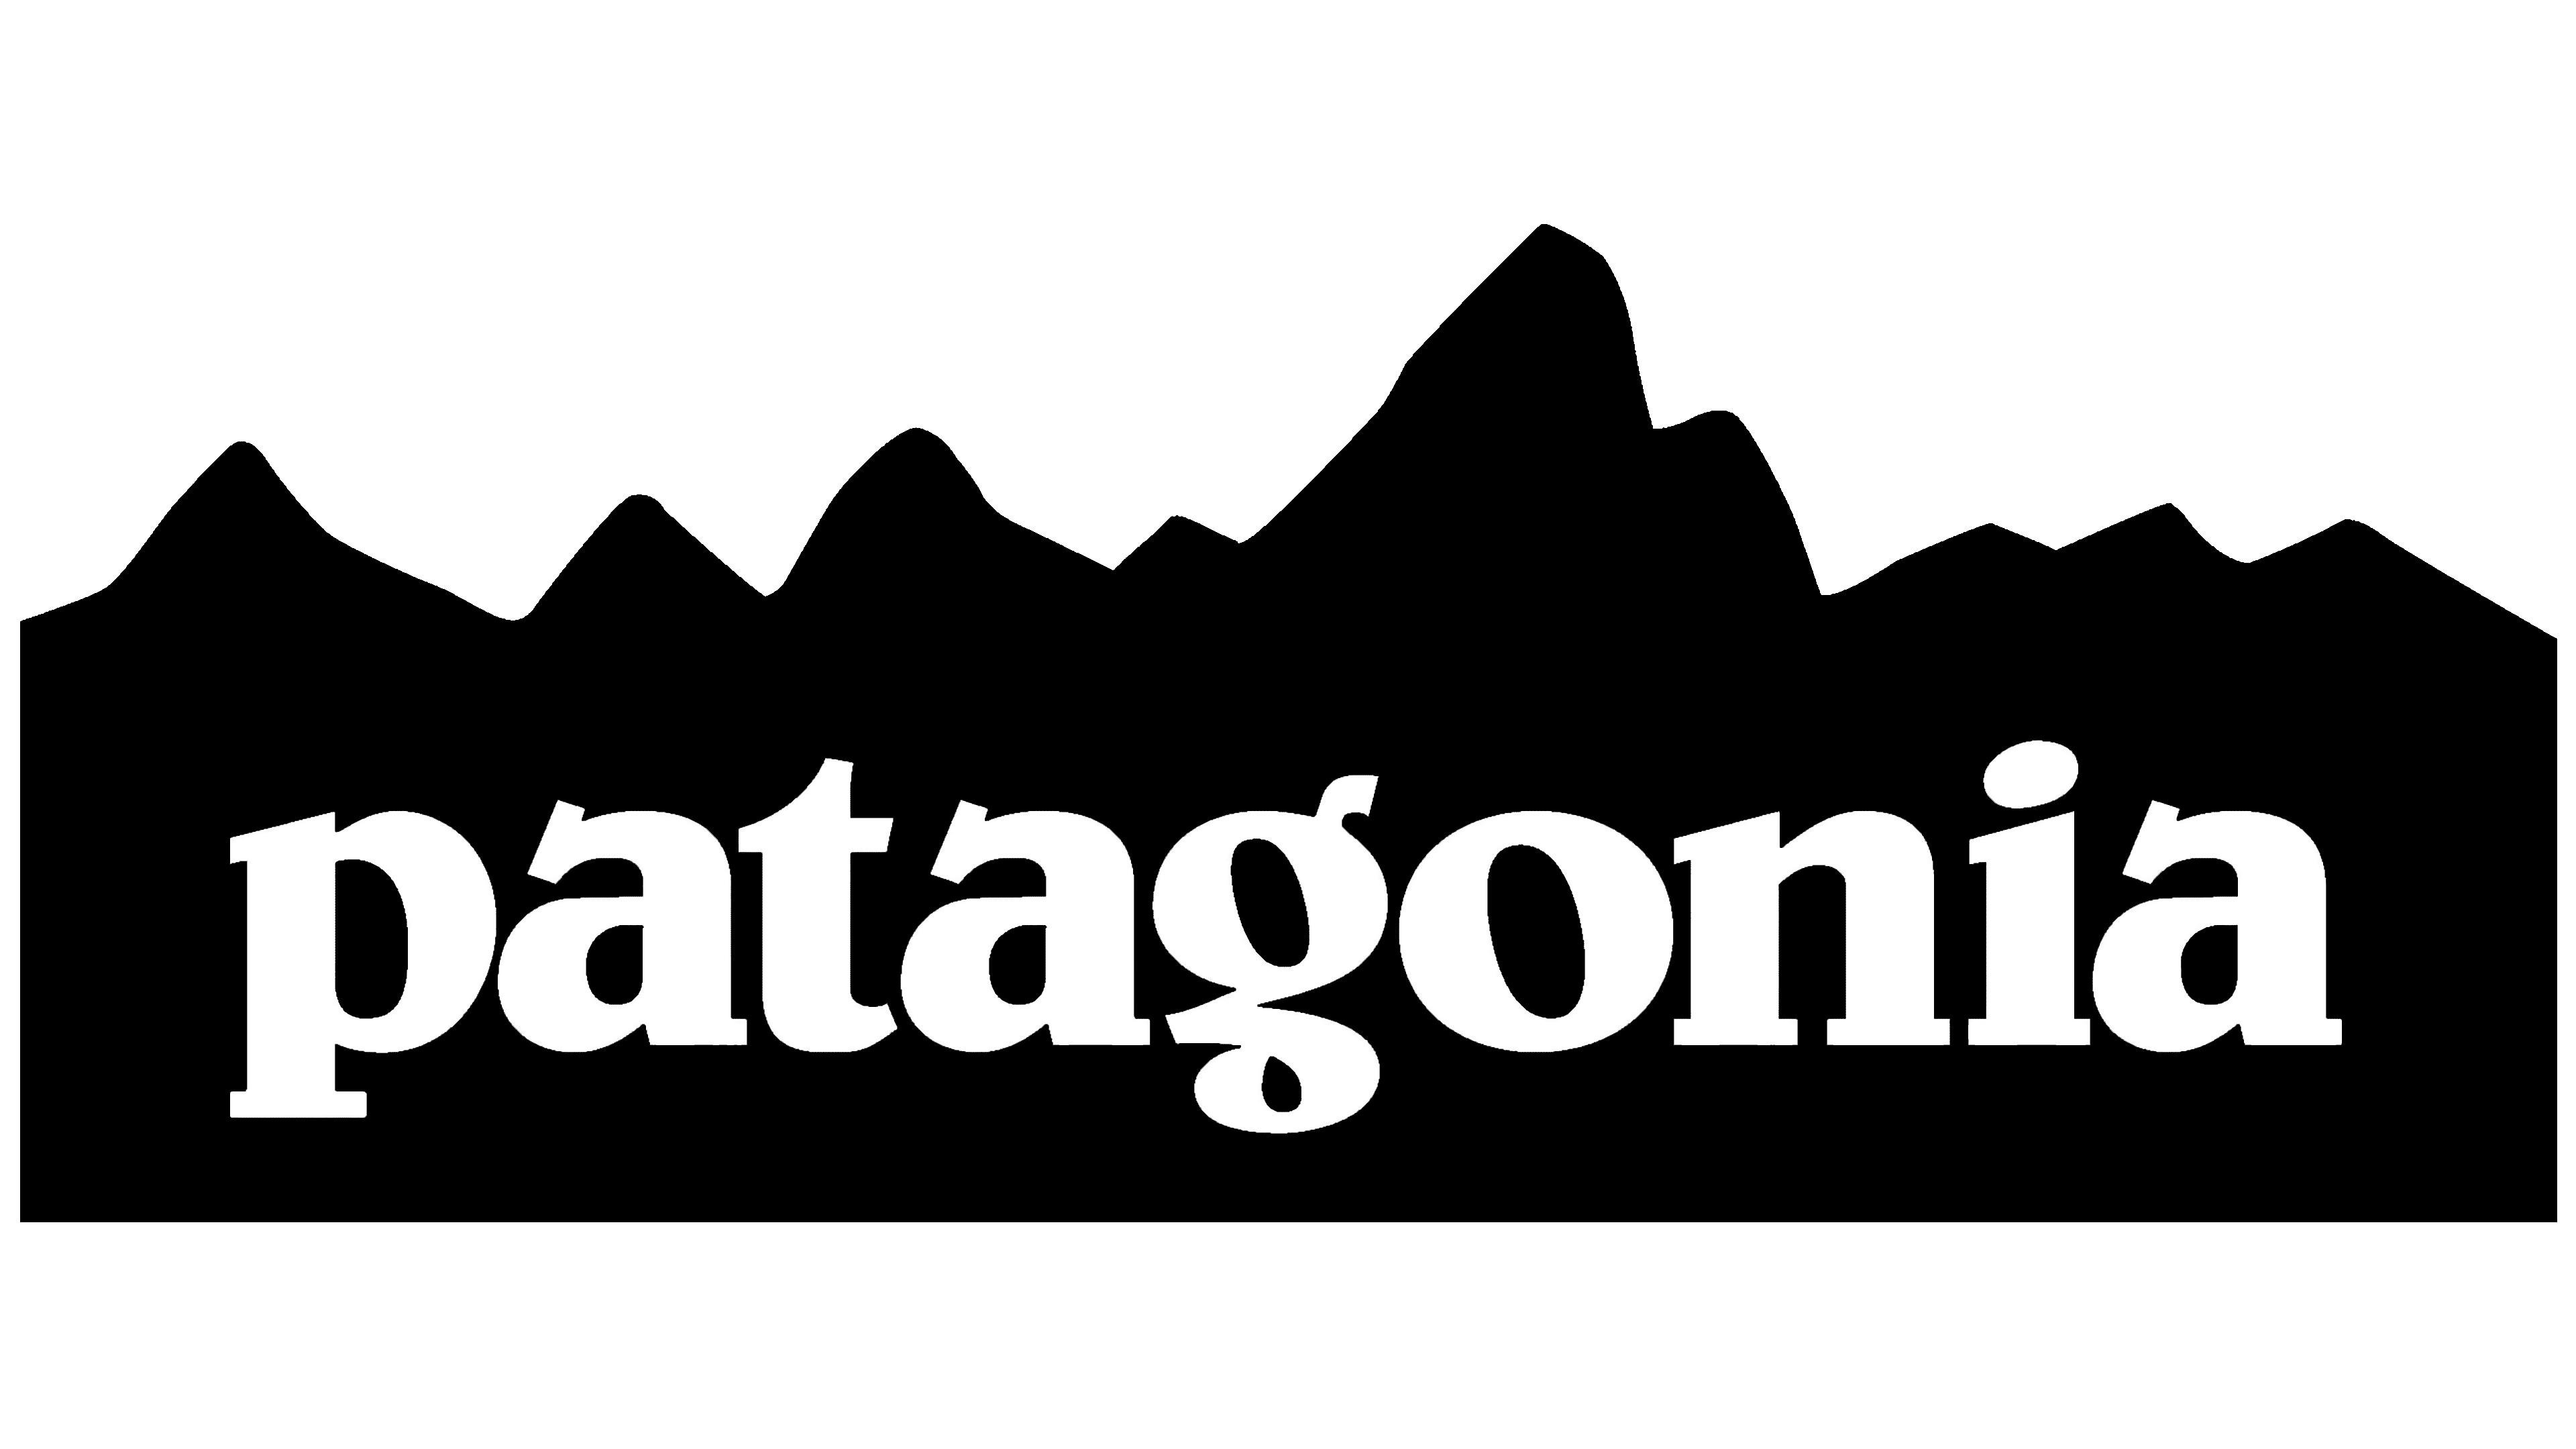 Patagonia - Mountain Kids Outfitters